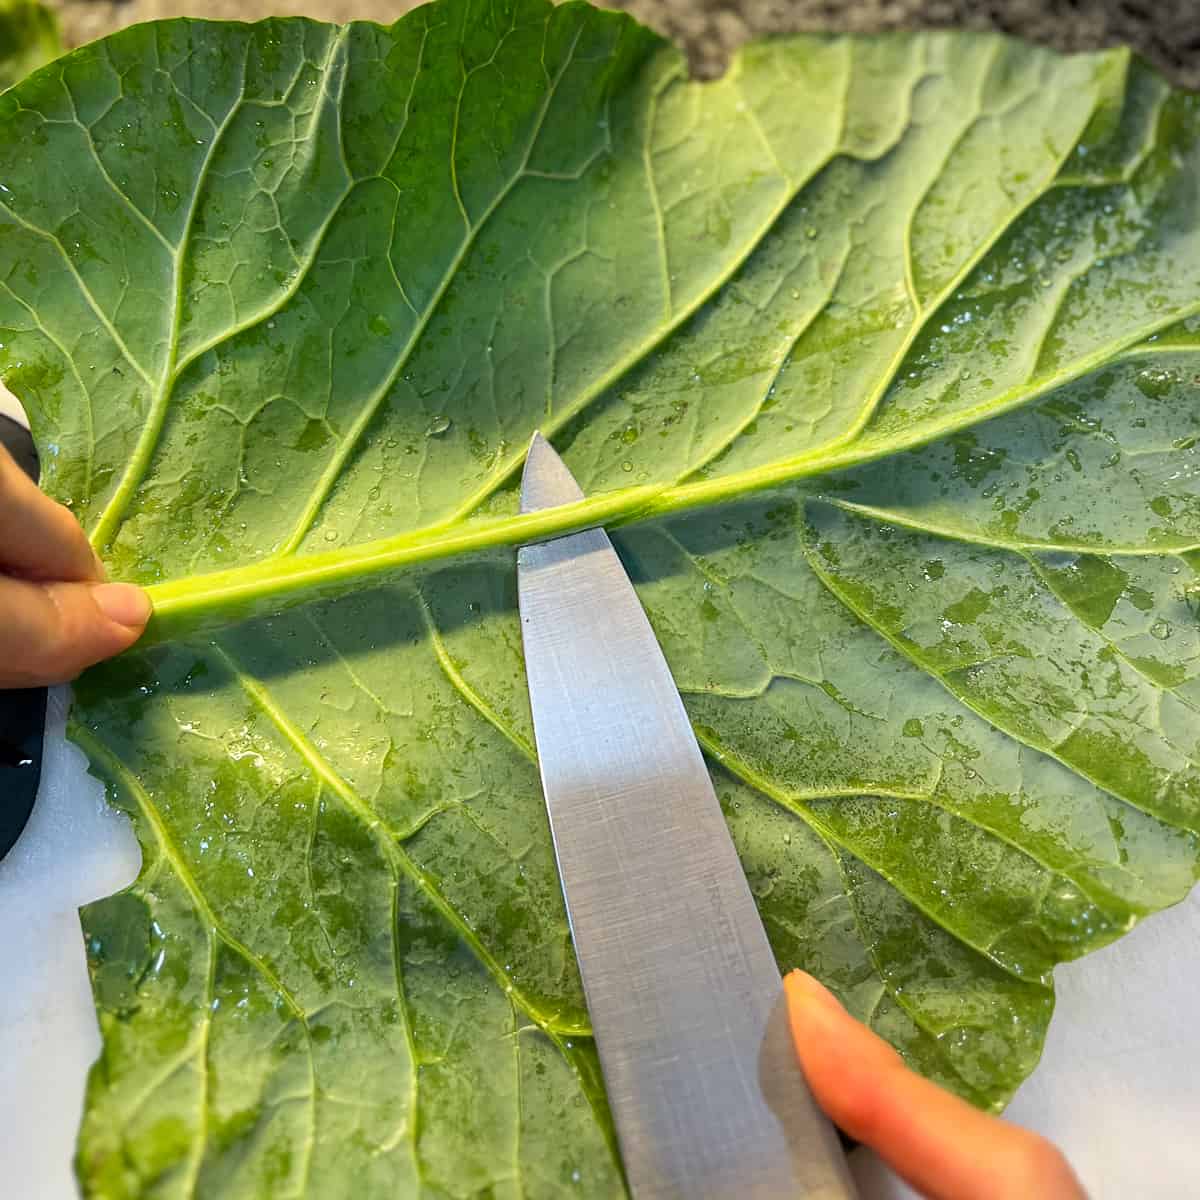 collard green leaf with stem being trimmed with a knife